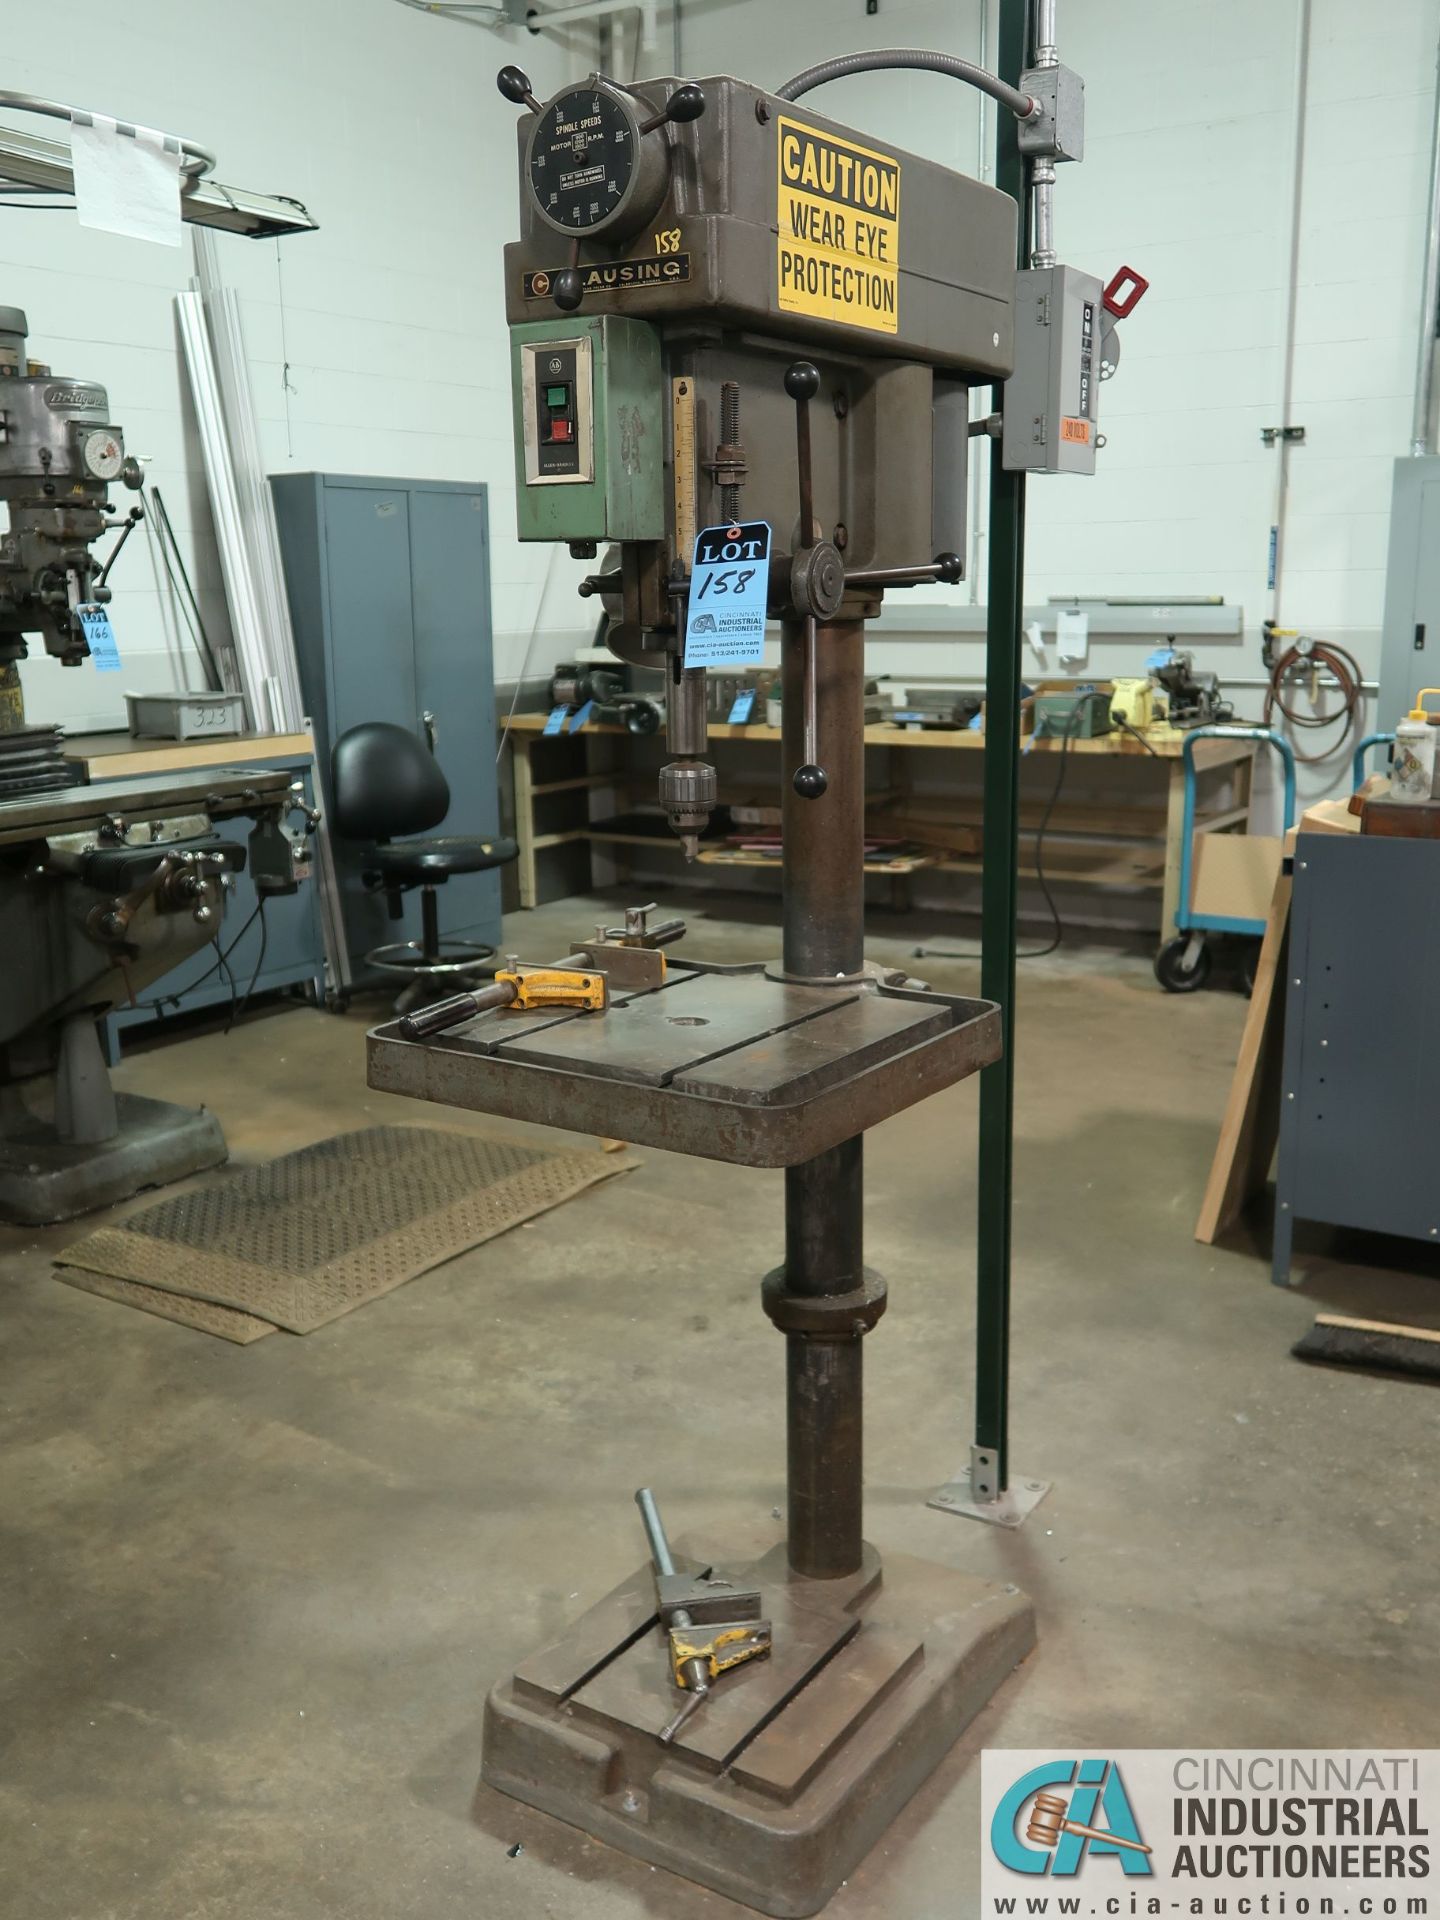 20" CLAUSING SERIES 22V SINGLE SPINDLE FLOOR DRILL; S/N 500699, 150 - 2,000 RPM, 15-1/2" X 18"